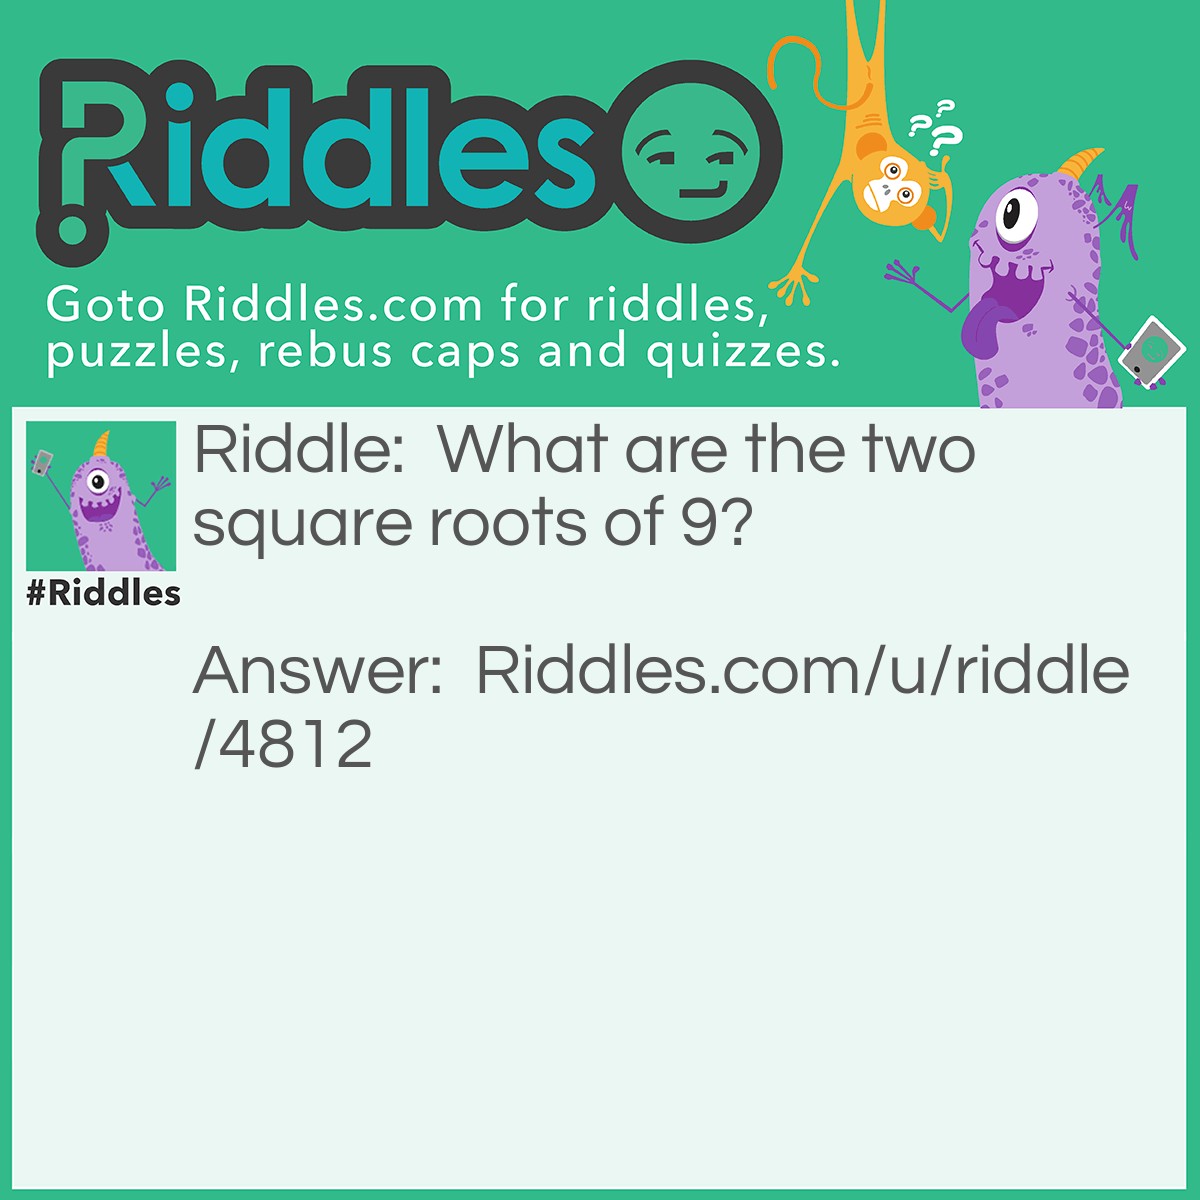 Riddle: What are the two square roots of 9? Answer: 3 and -3.